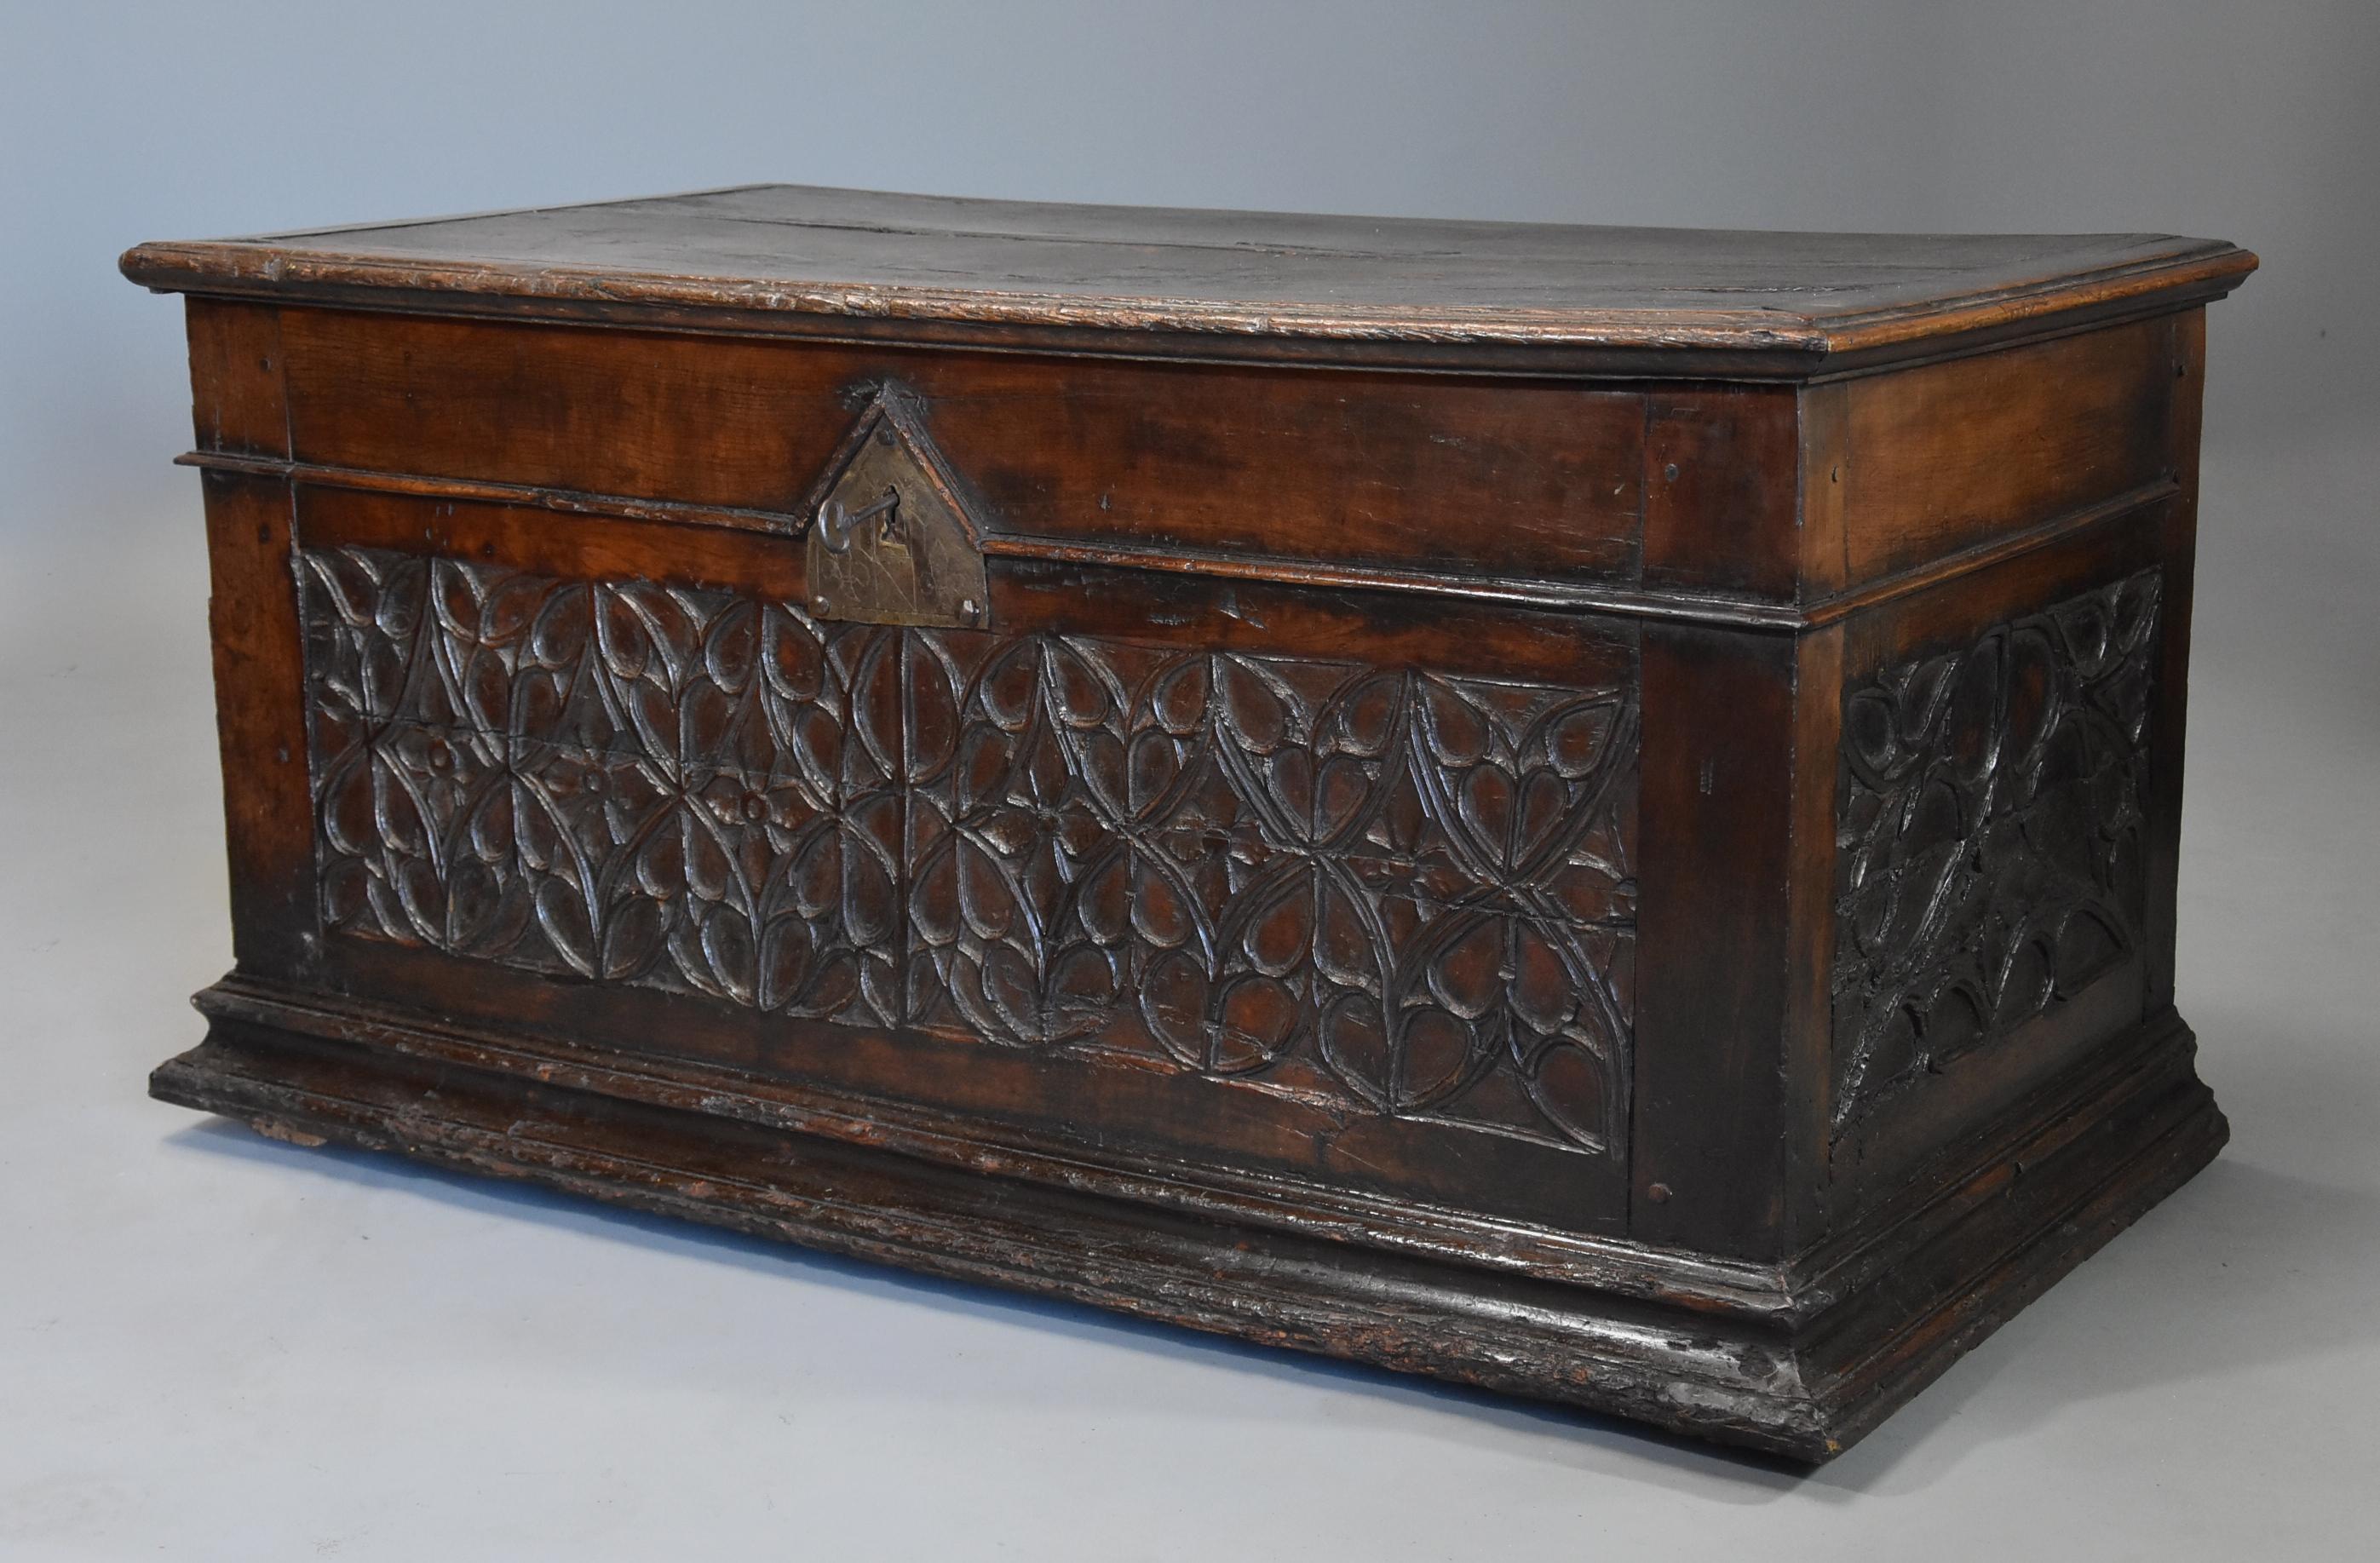 An extremely rare French early 16th century (circa 1500) fruitwood (cherry) coffer of superb patina.

This coffer consists of a solid plank top with moulded edge with evidence of old restoration, the top opening to reveal steel hinges, the